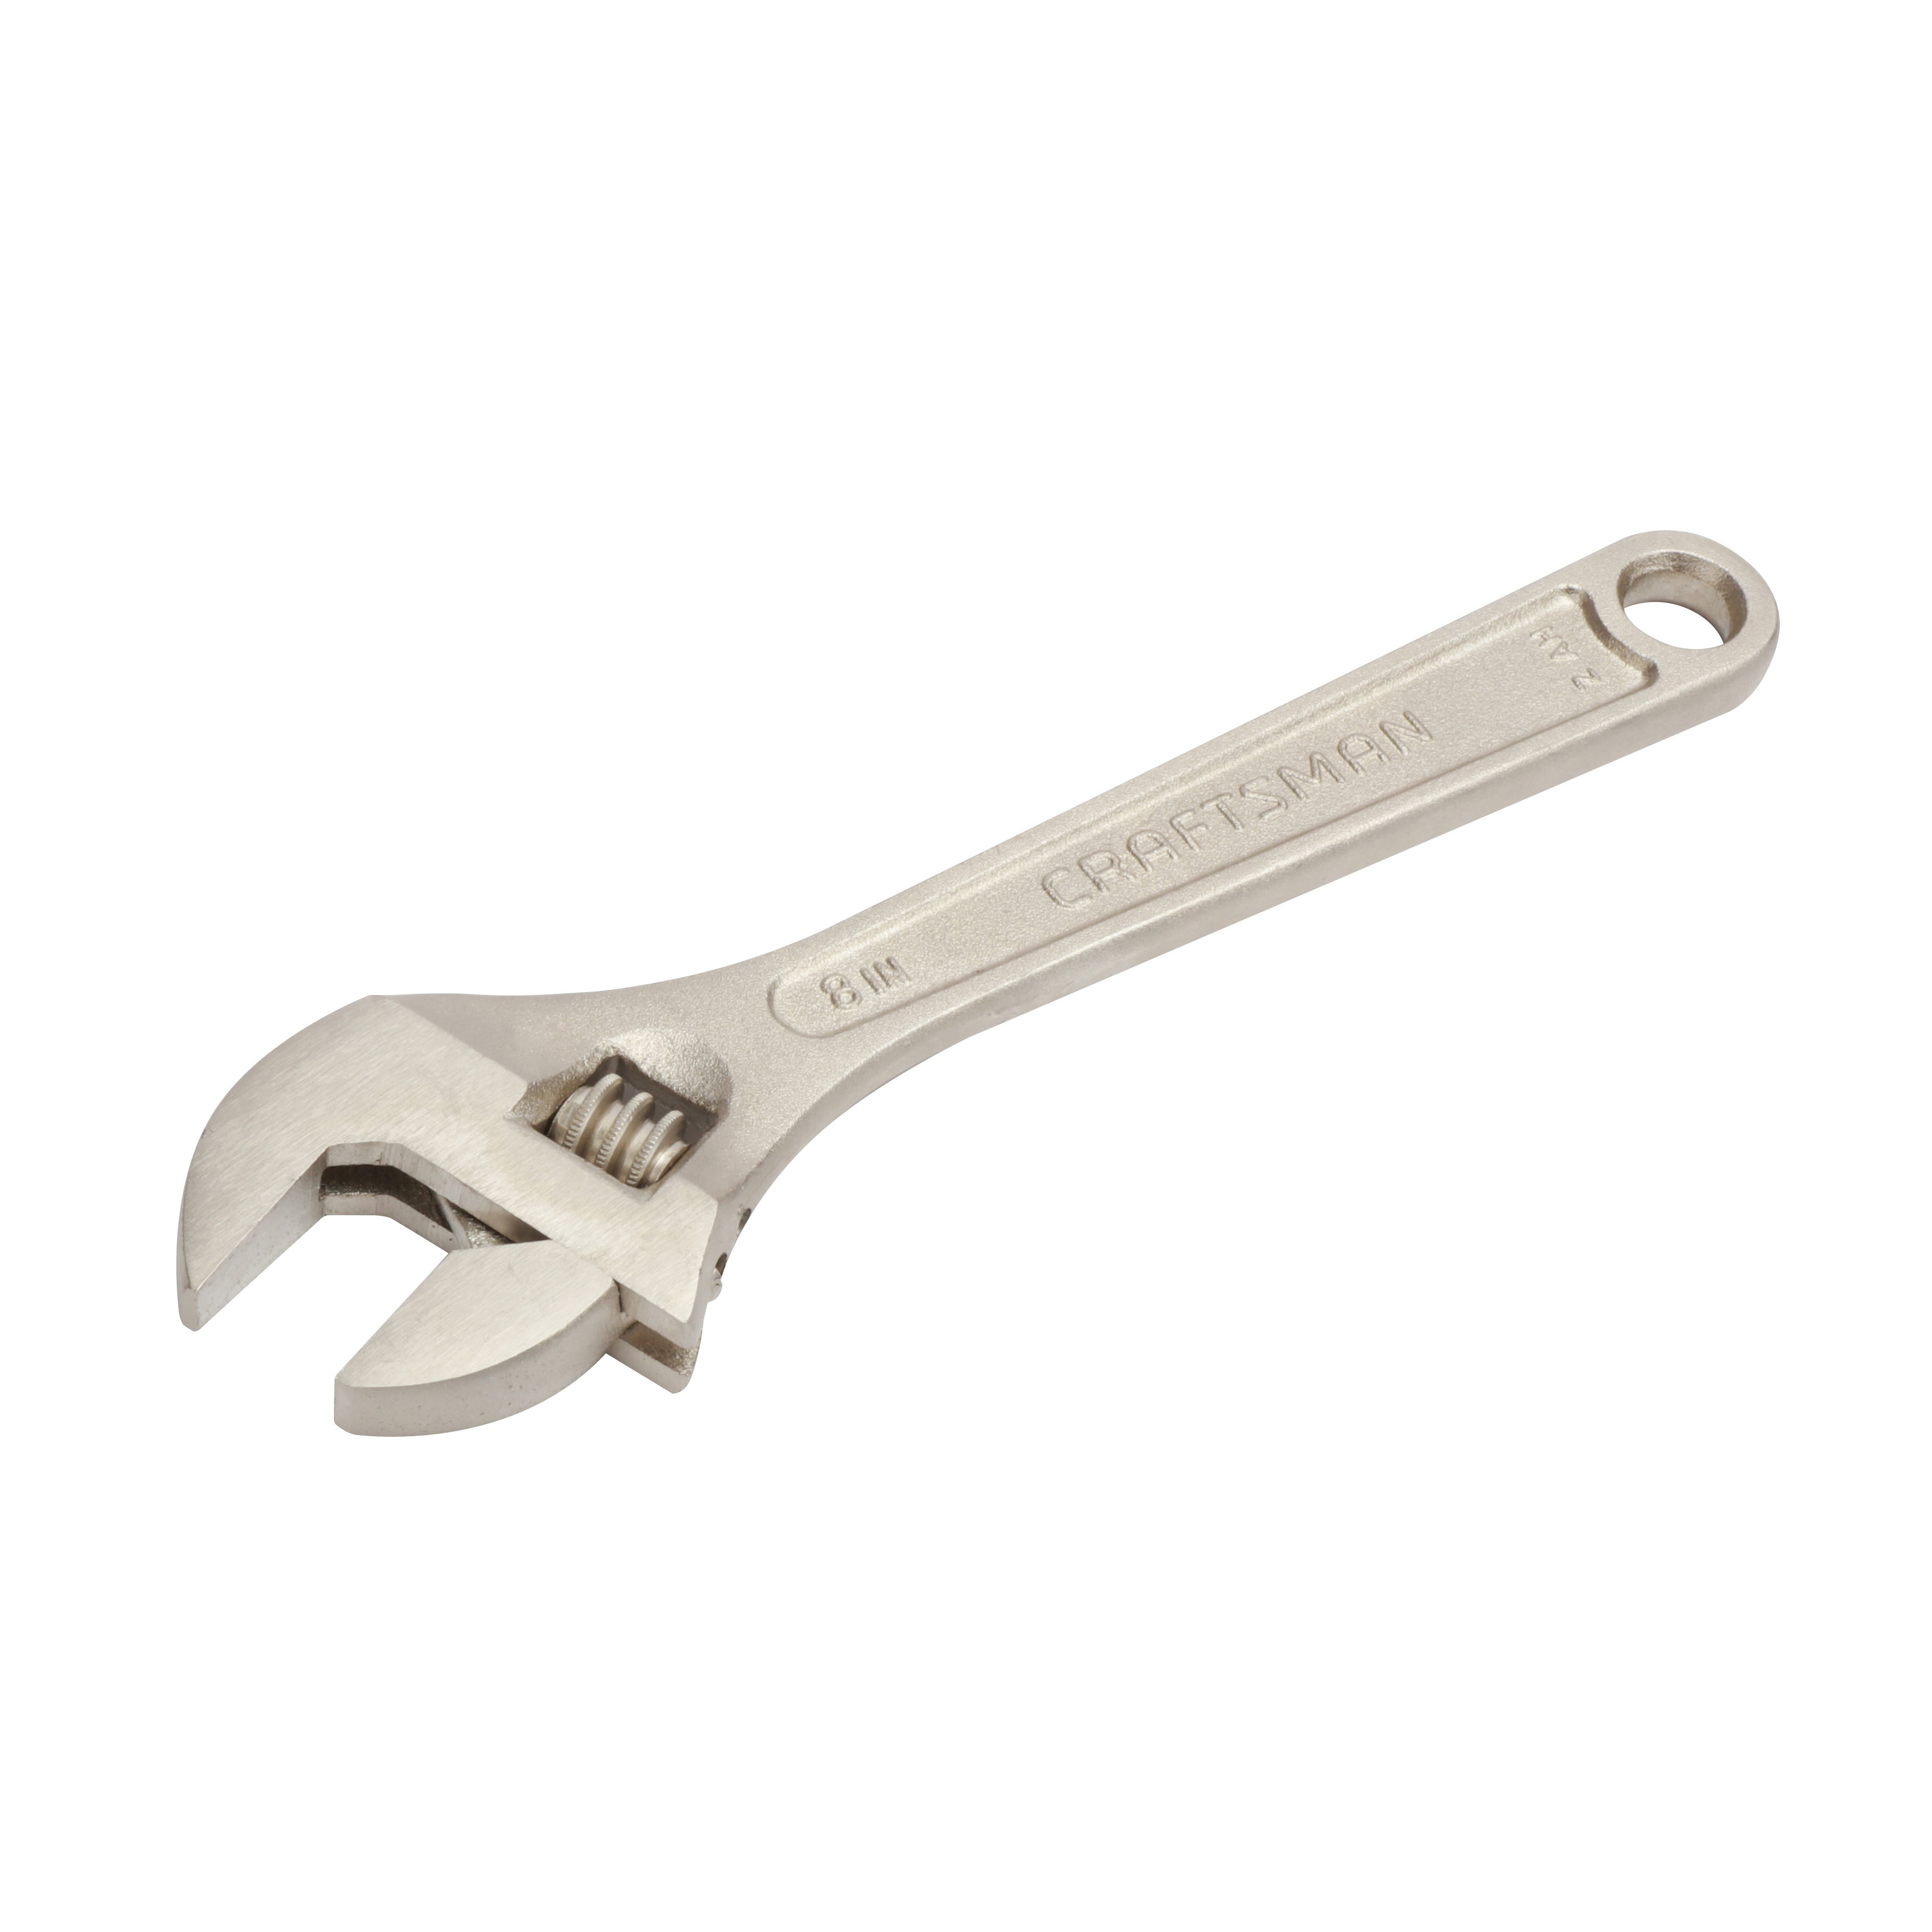 Craftsman  8IN ADJUSTABLE WRENCH